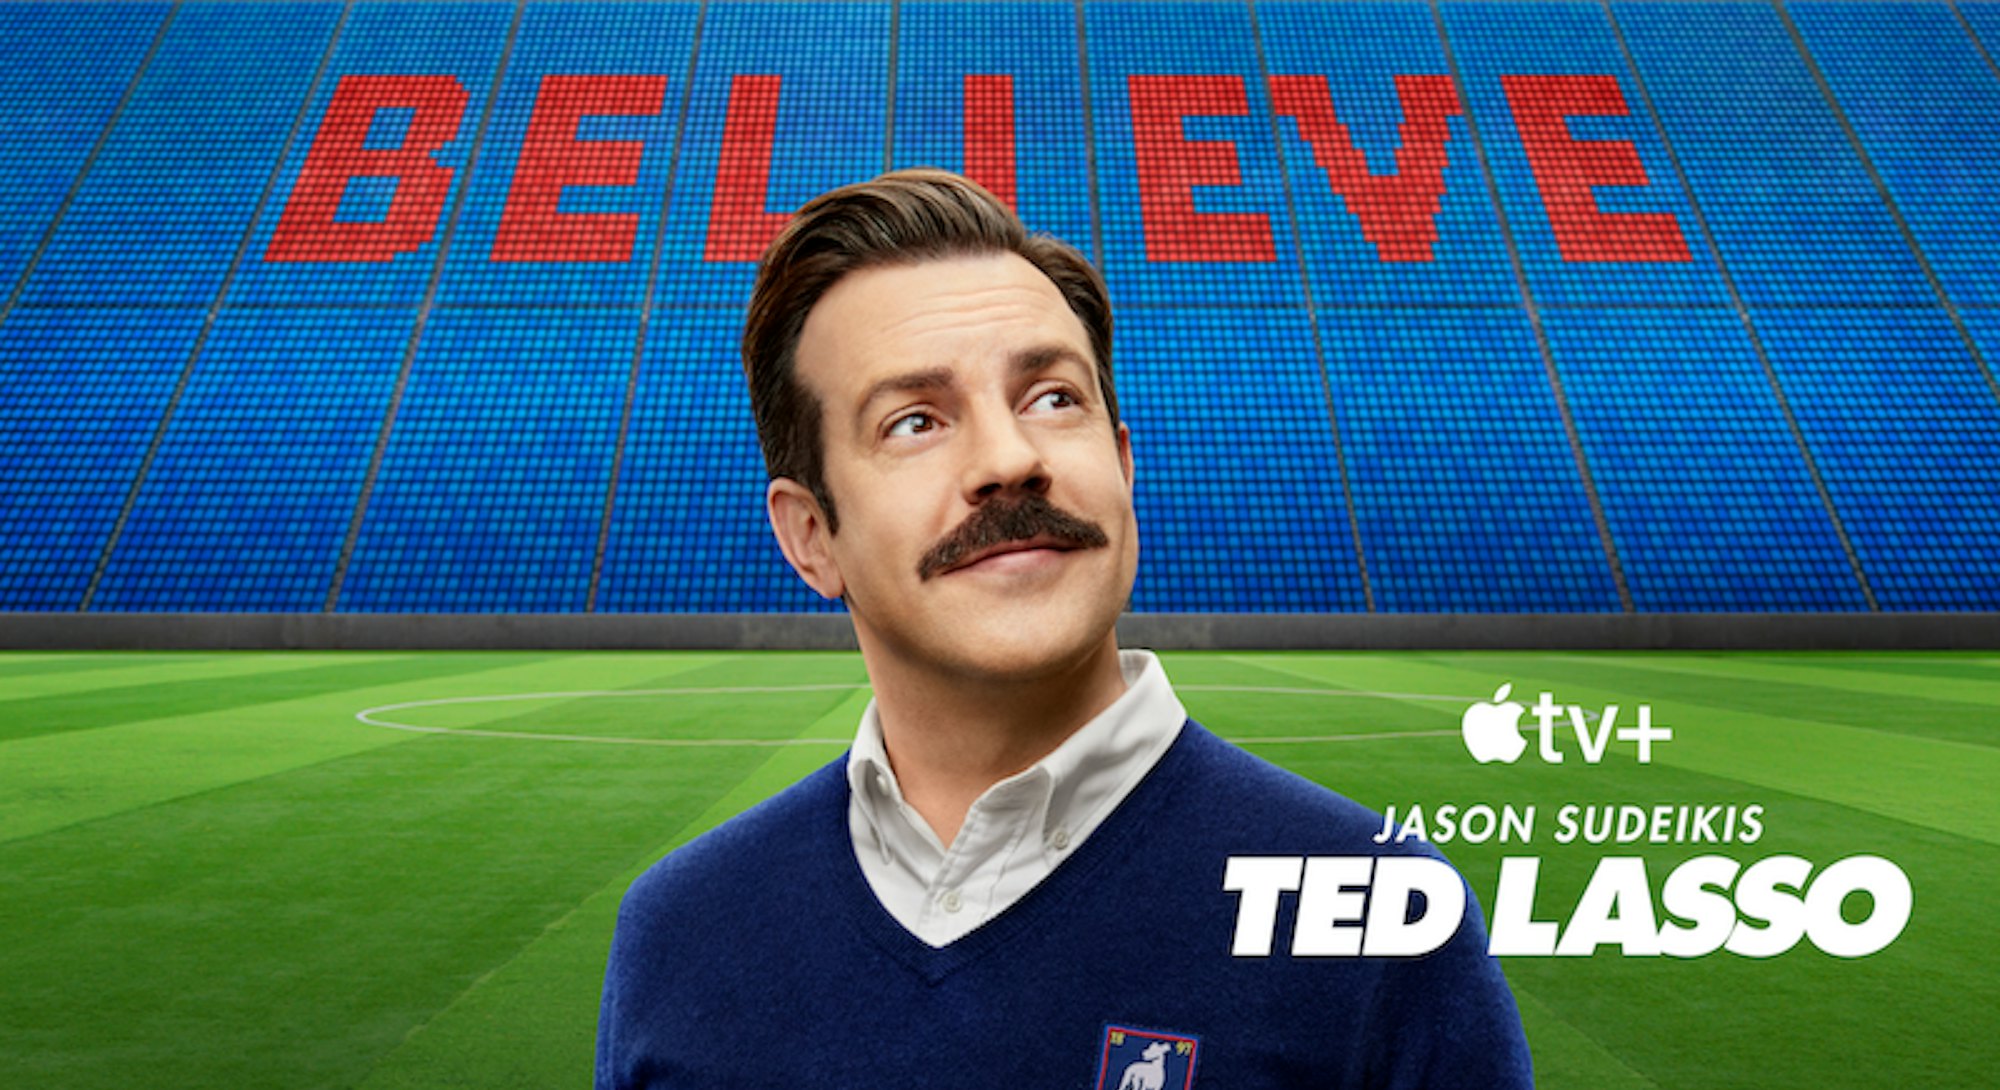 Ted Lasso standing at a soccer stadium